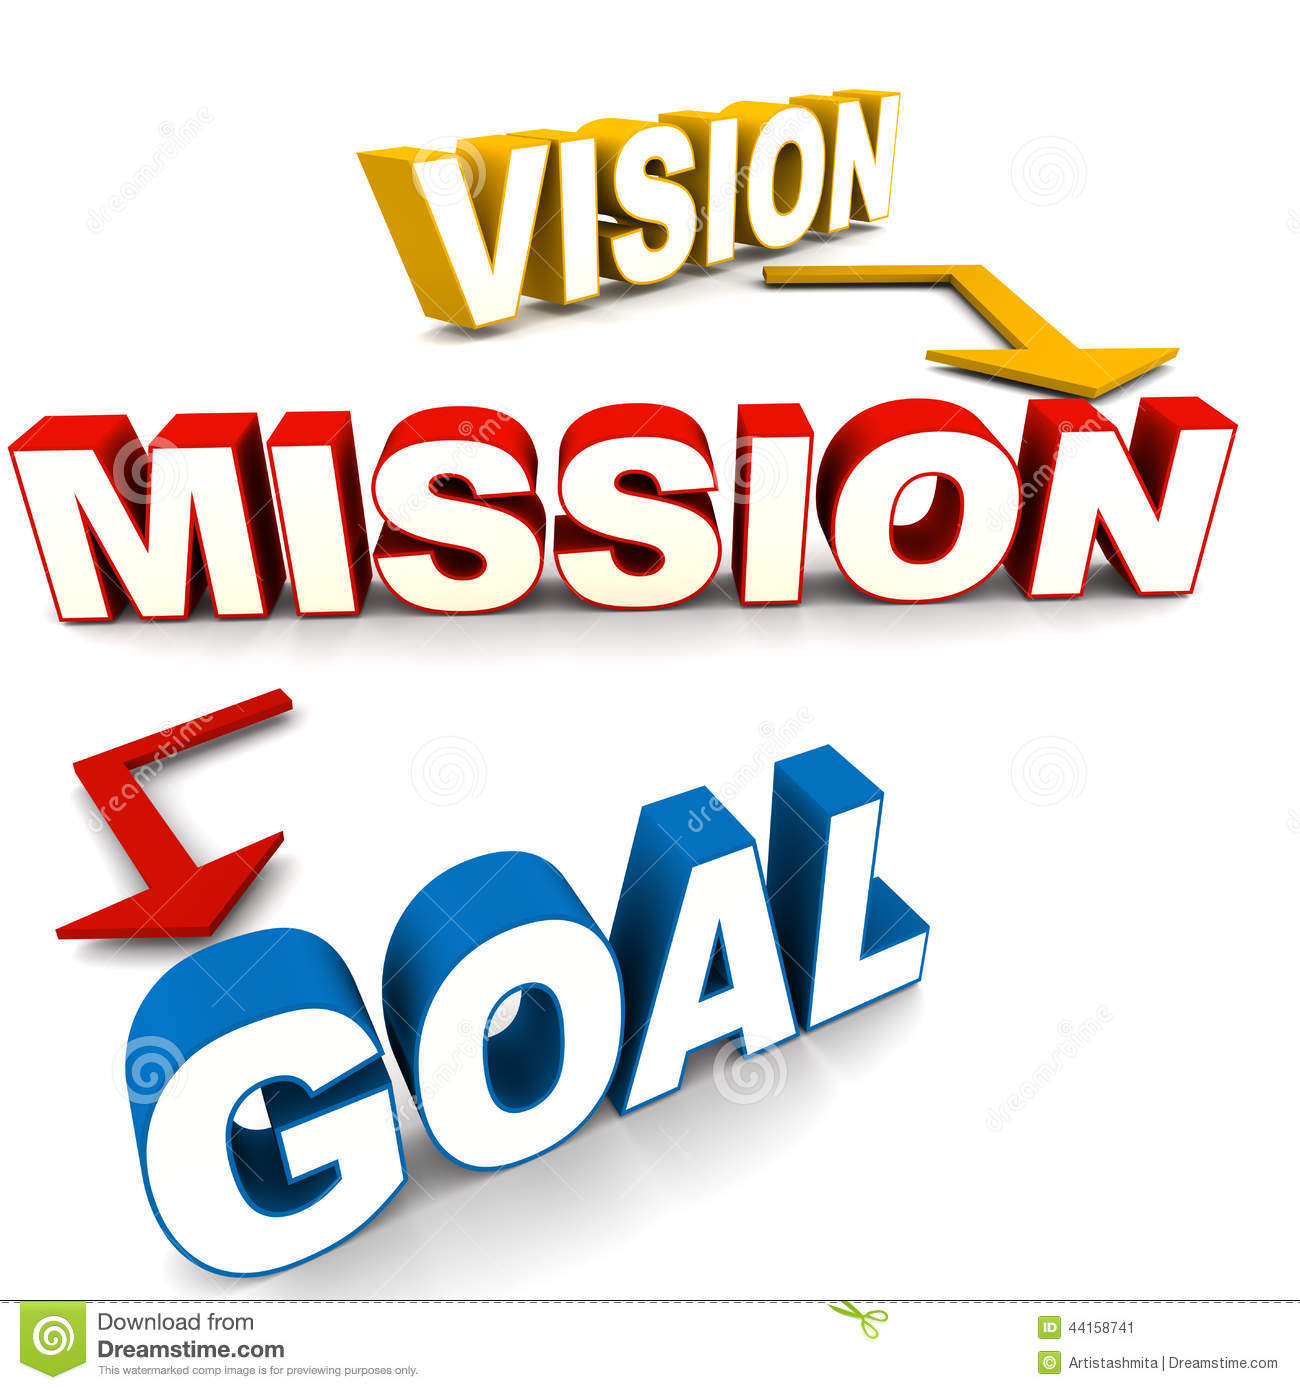 Goal clipart free.